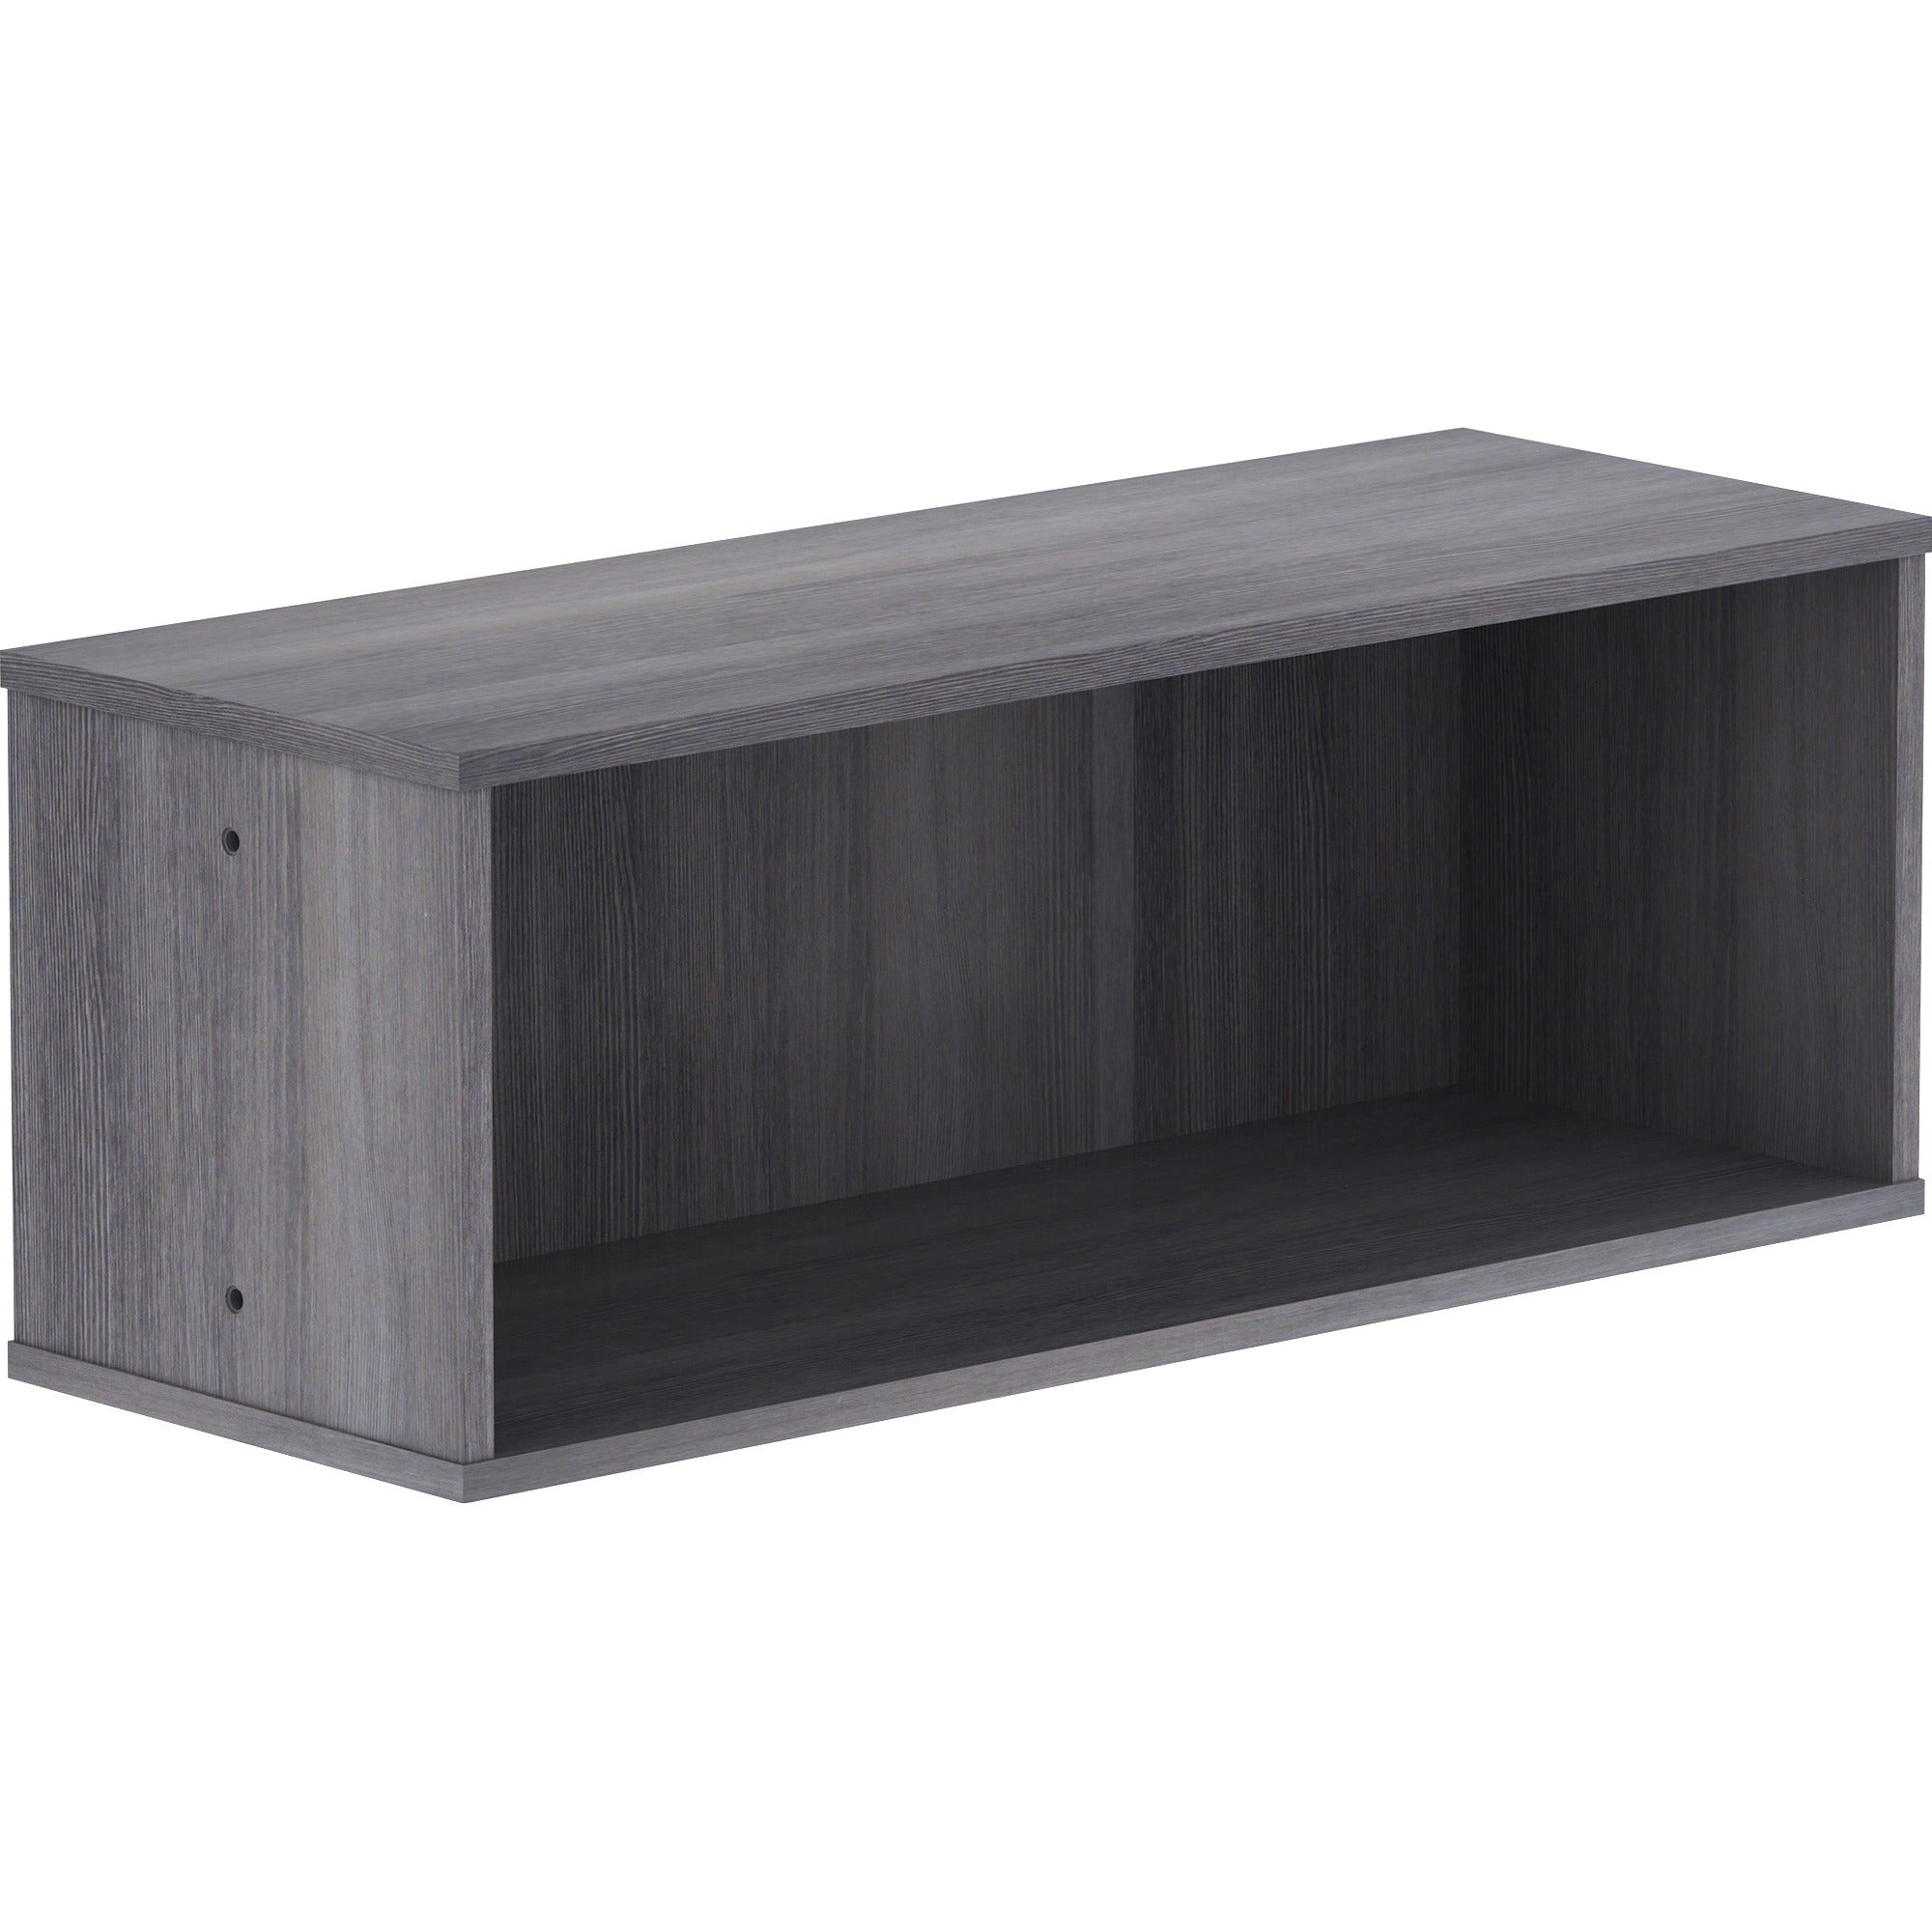 lorell-panel-system-open-storage-cabinet-181-height-x-315-width-x-158-depth-charcoal-laminate-1-each_llr90281 - 1